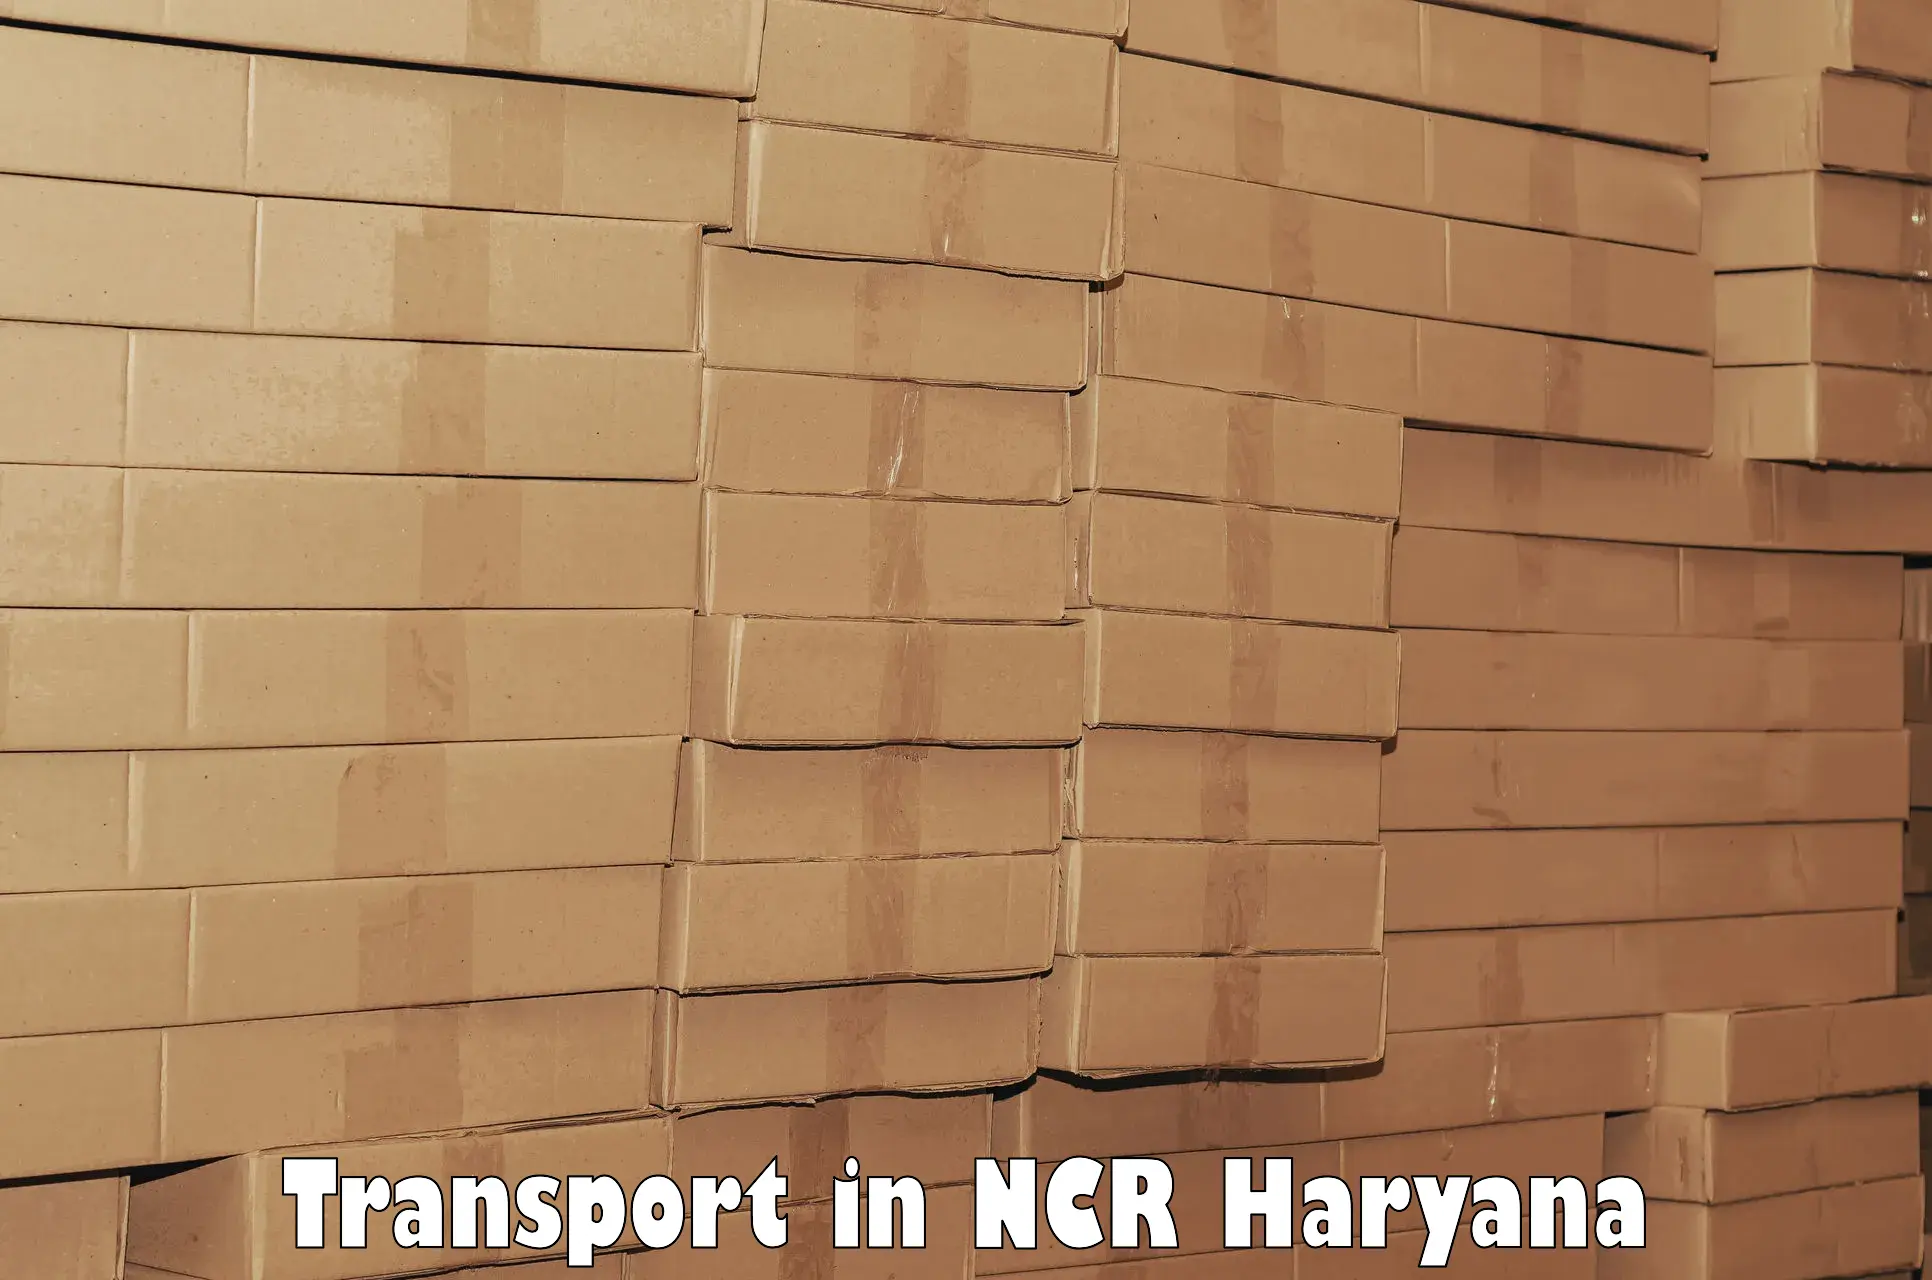 Interstate transport services in NCR Haryana